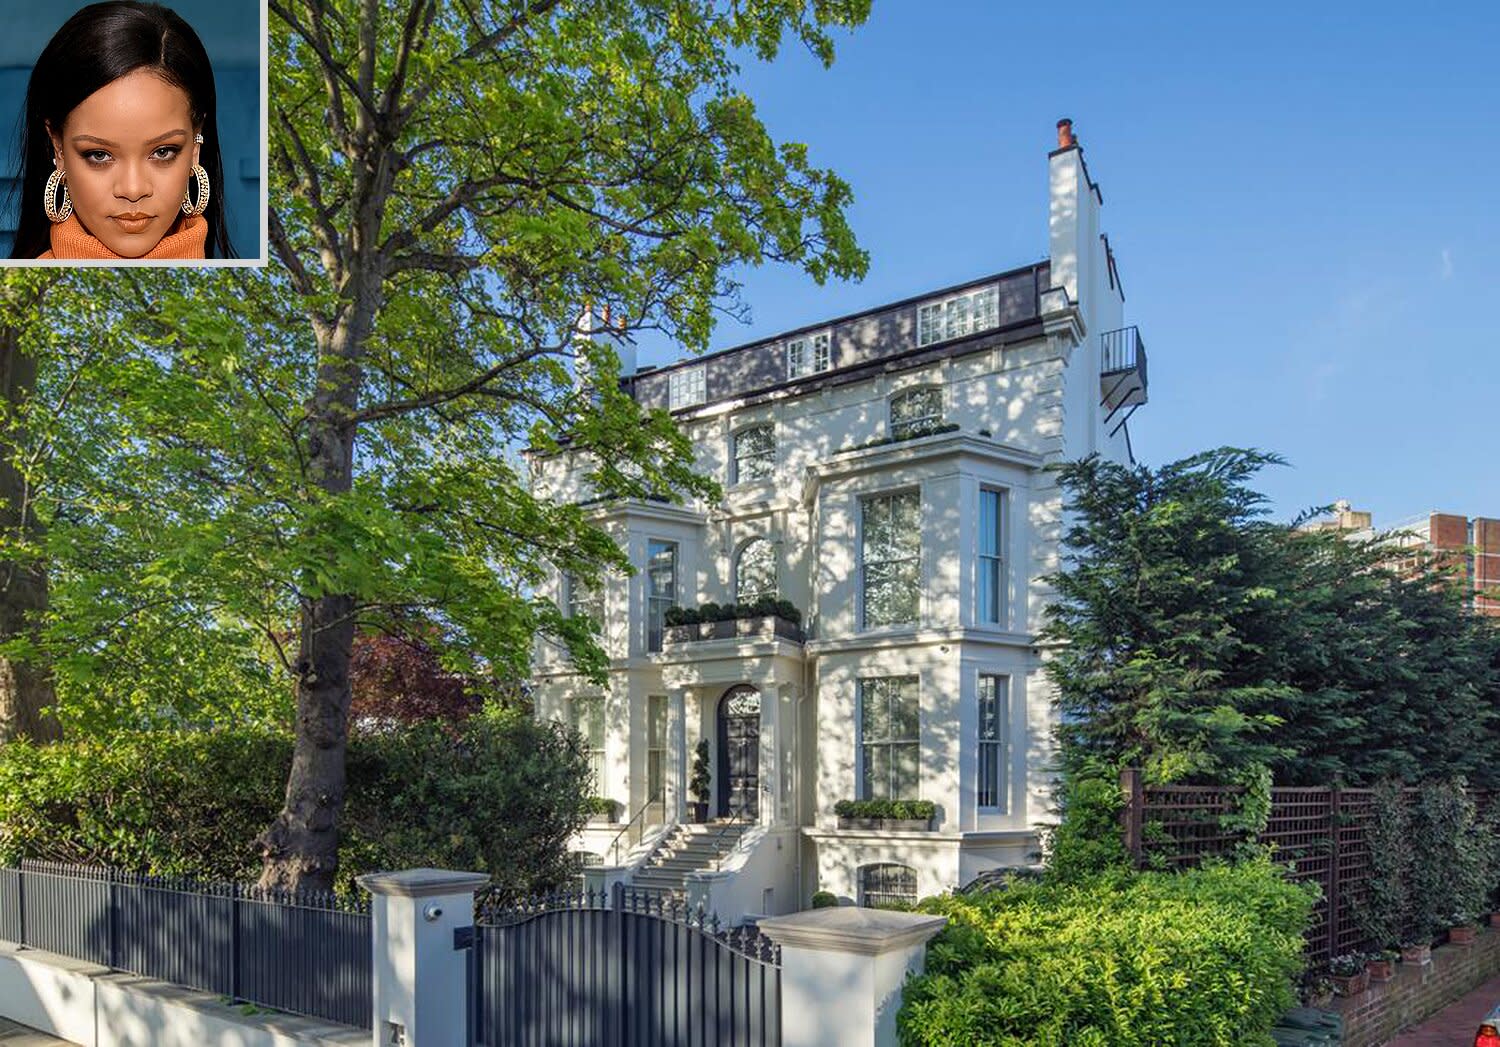 Rihanna's London Rental Home Is Listed for 41 Million